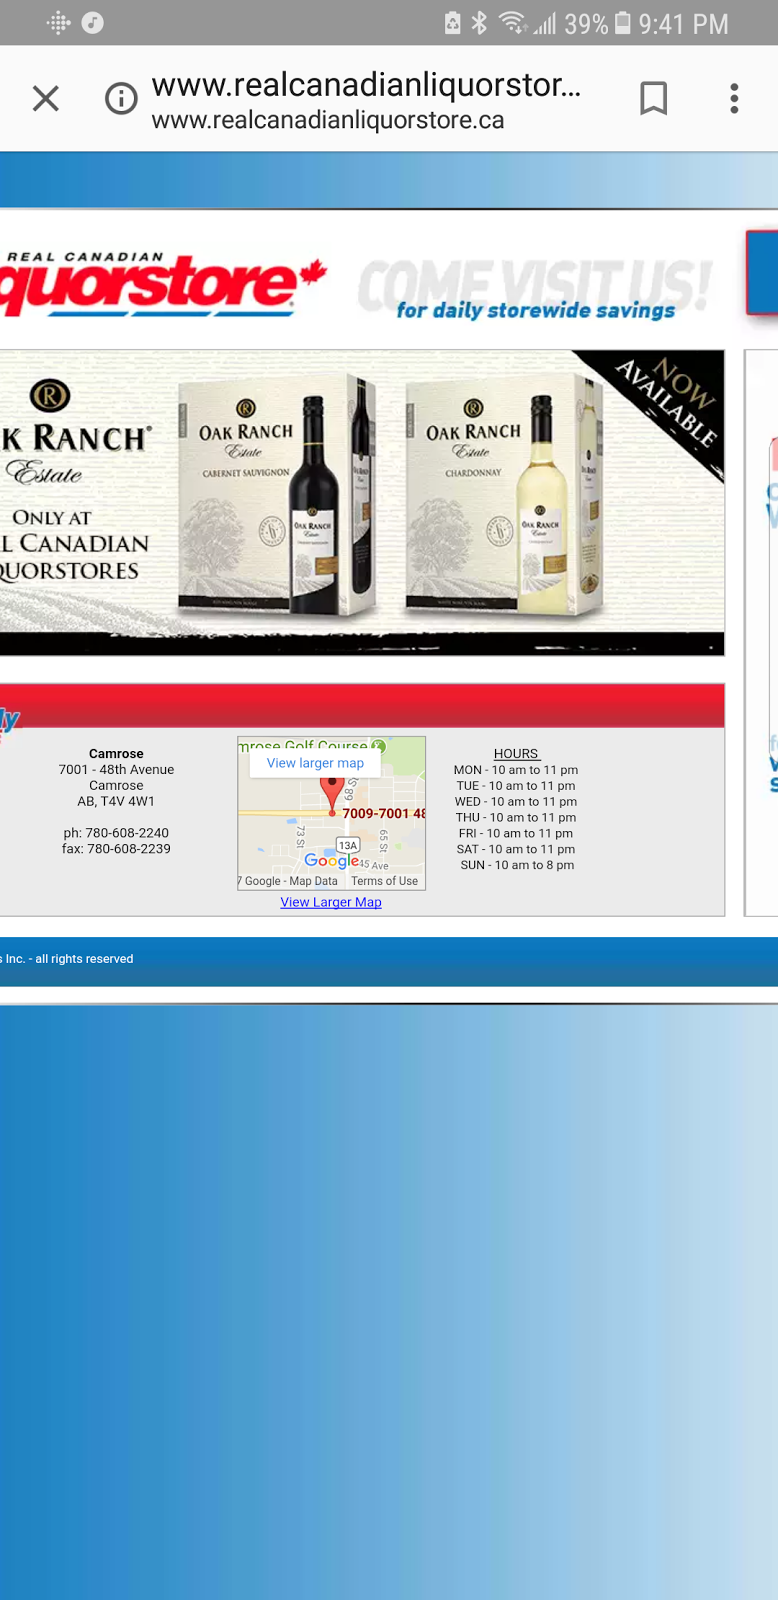 Real Canadian Liquor Store | 7001 48 Ave, Camrose, AB T4V 4W1, Canada | Phone: (780) 608-2240